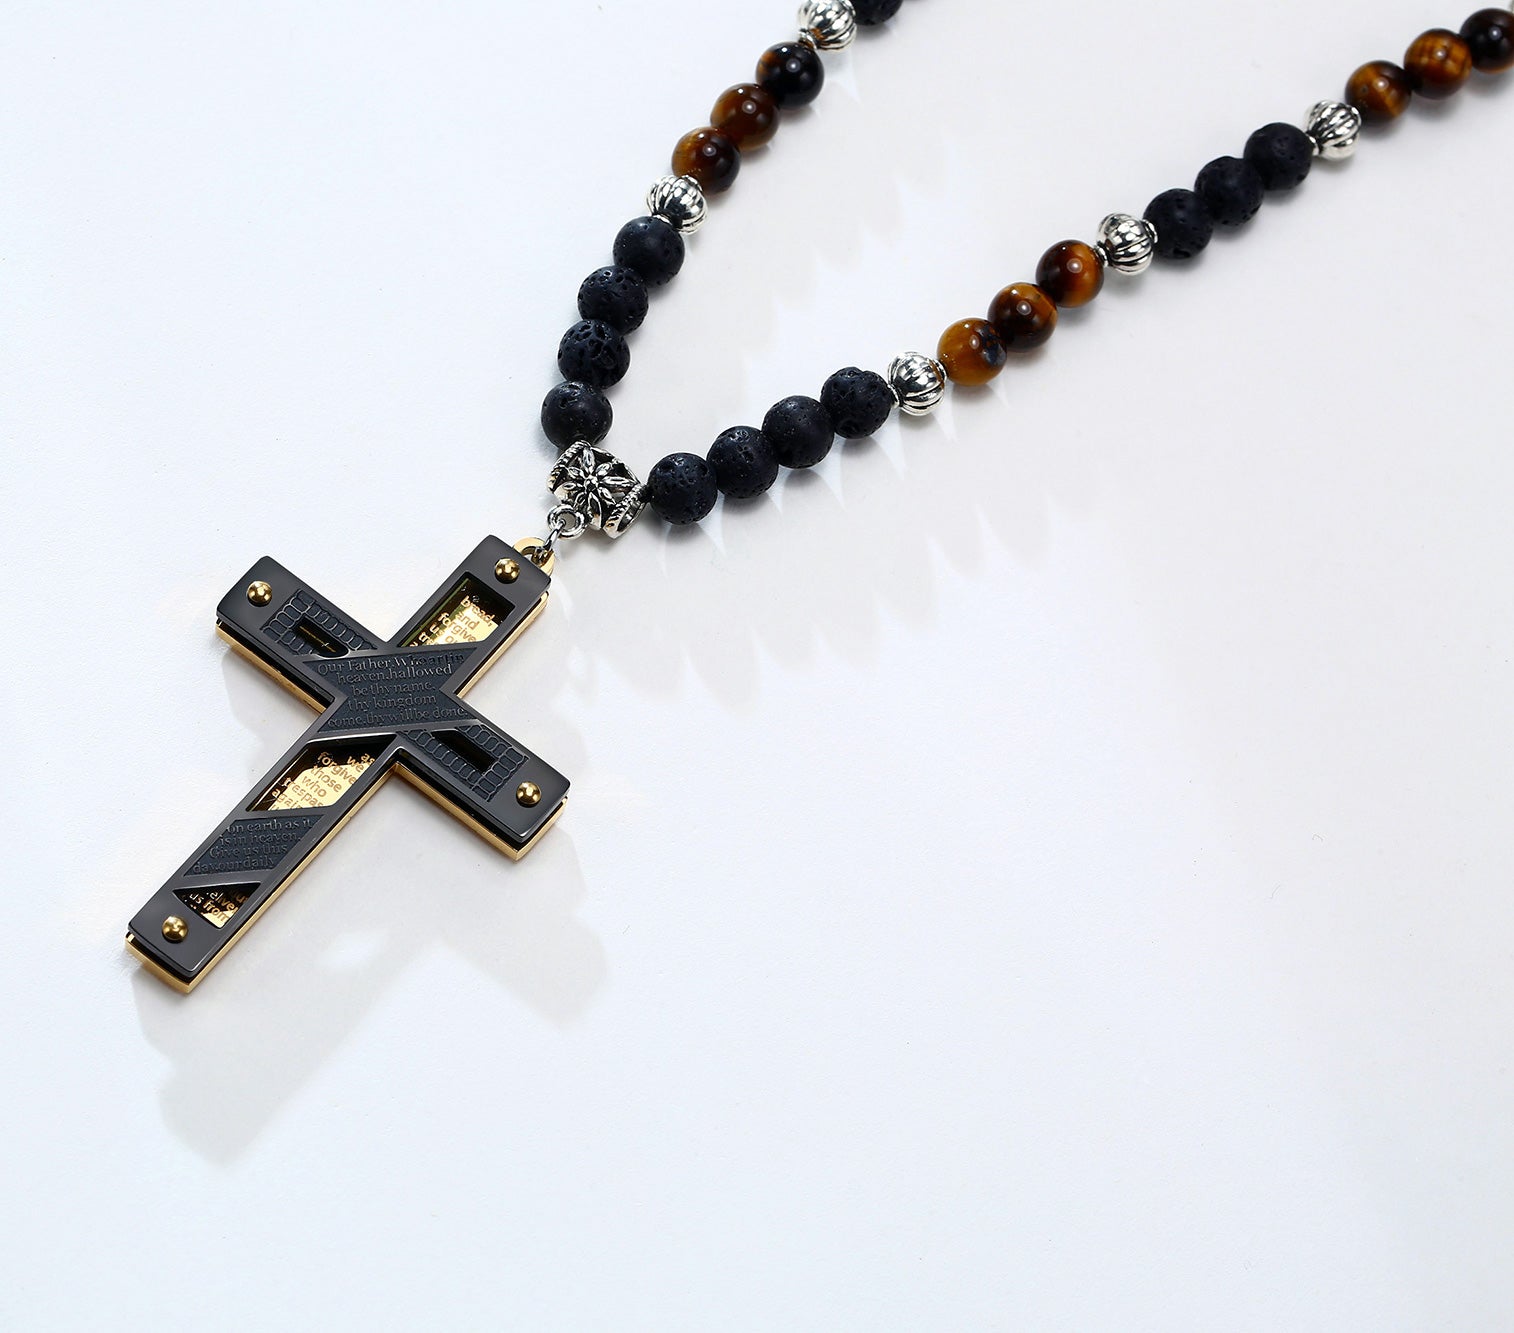 Stainless Steel The Lord's Prayer Cross Necklace